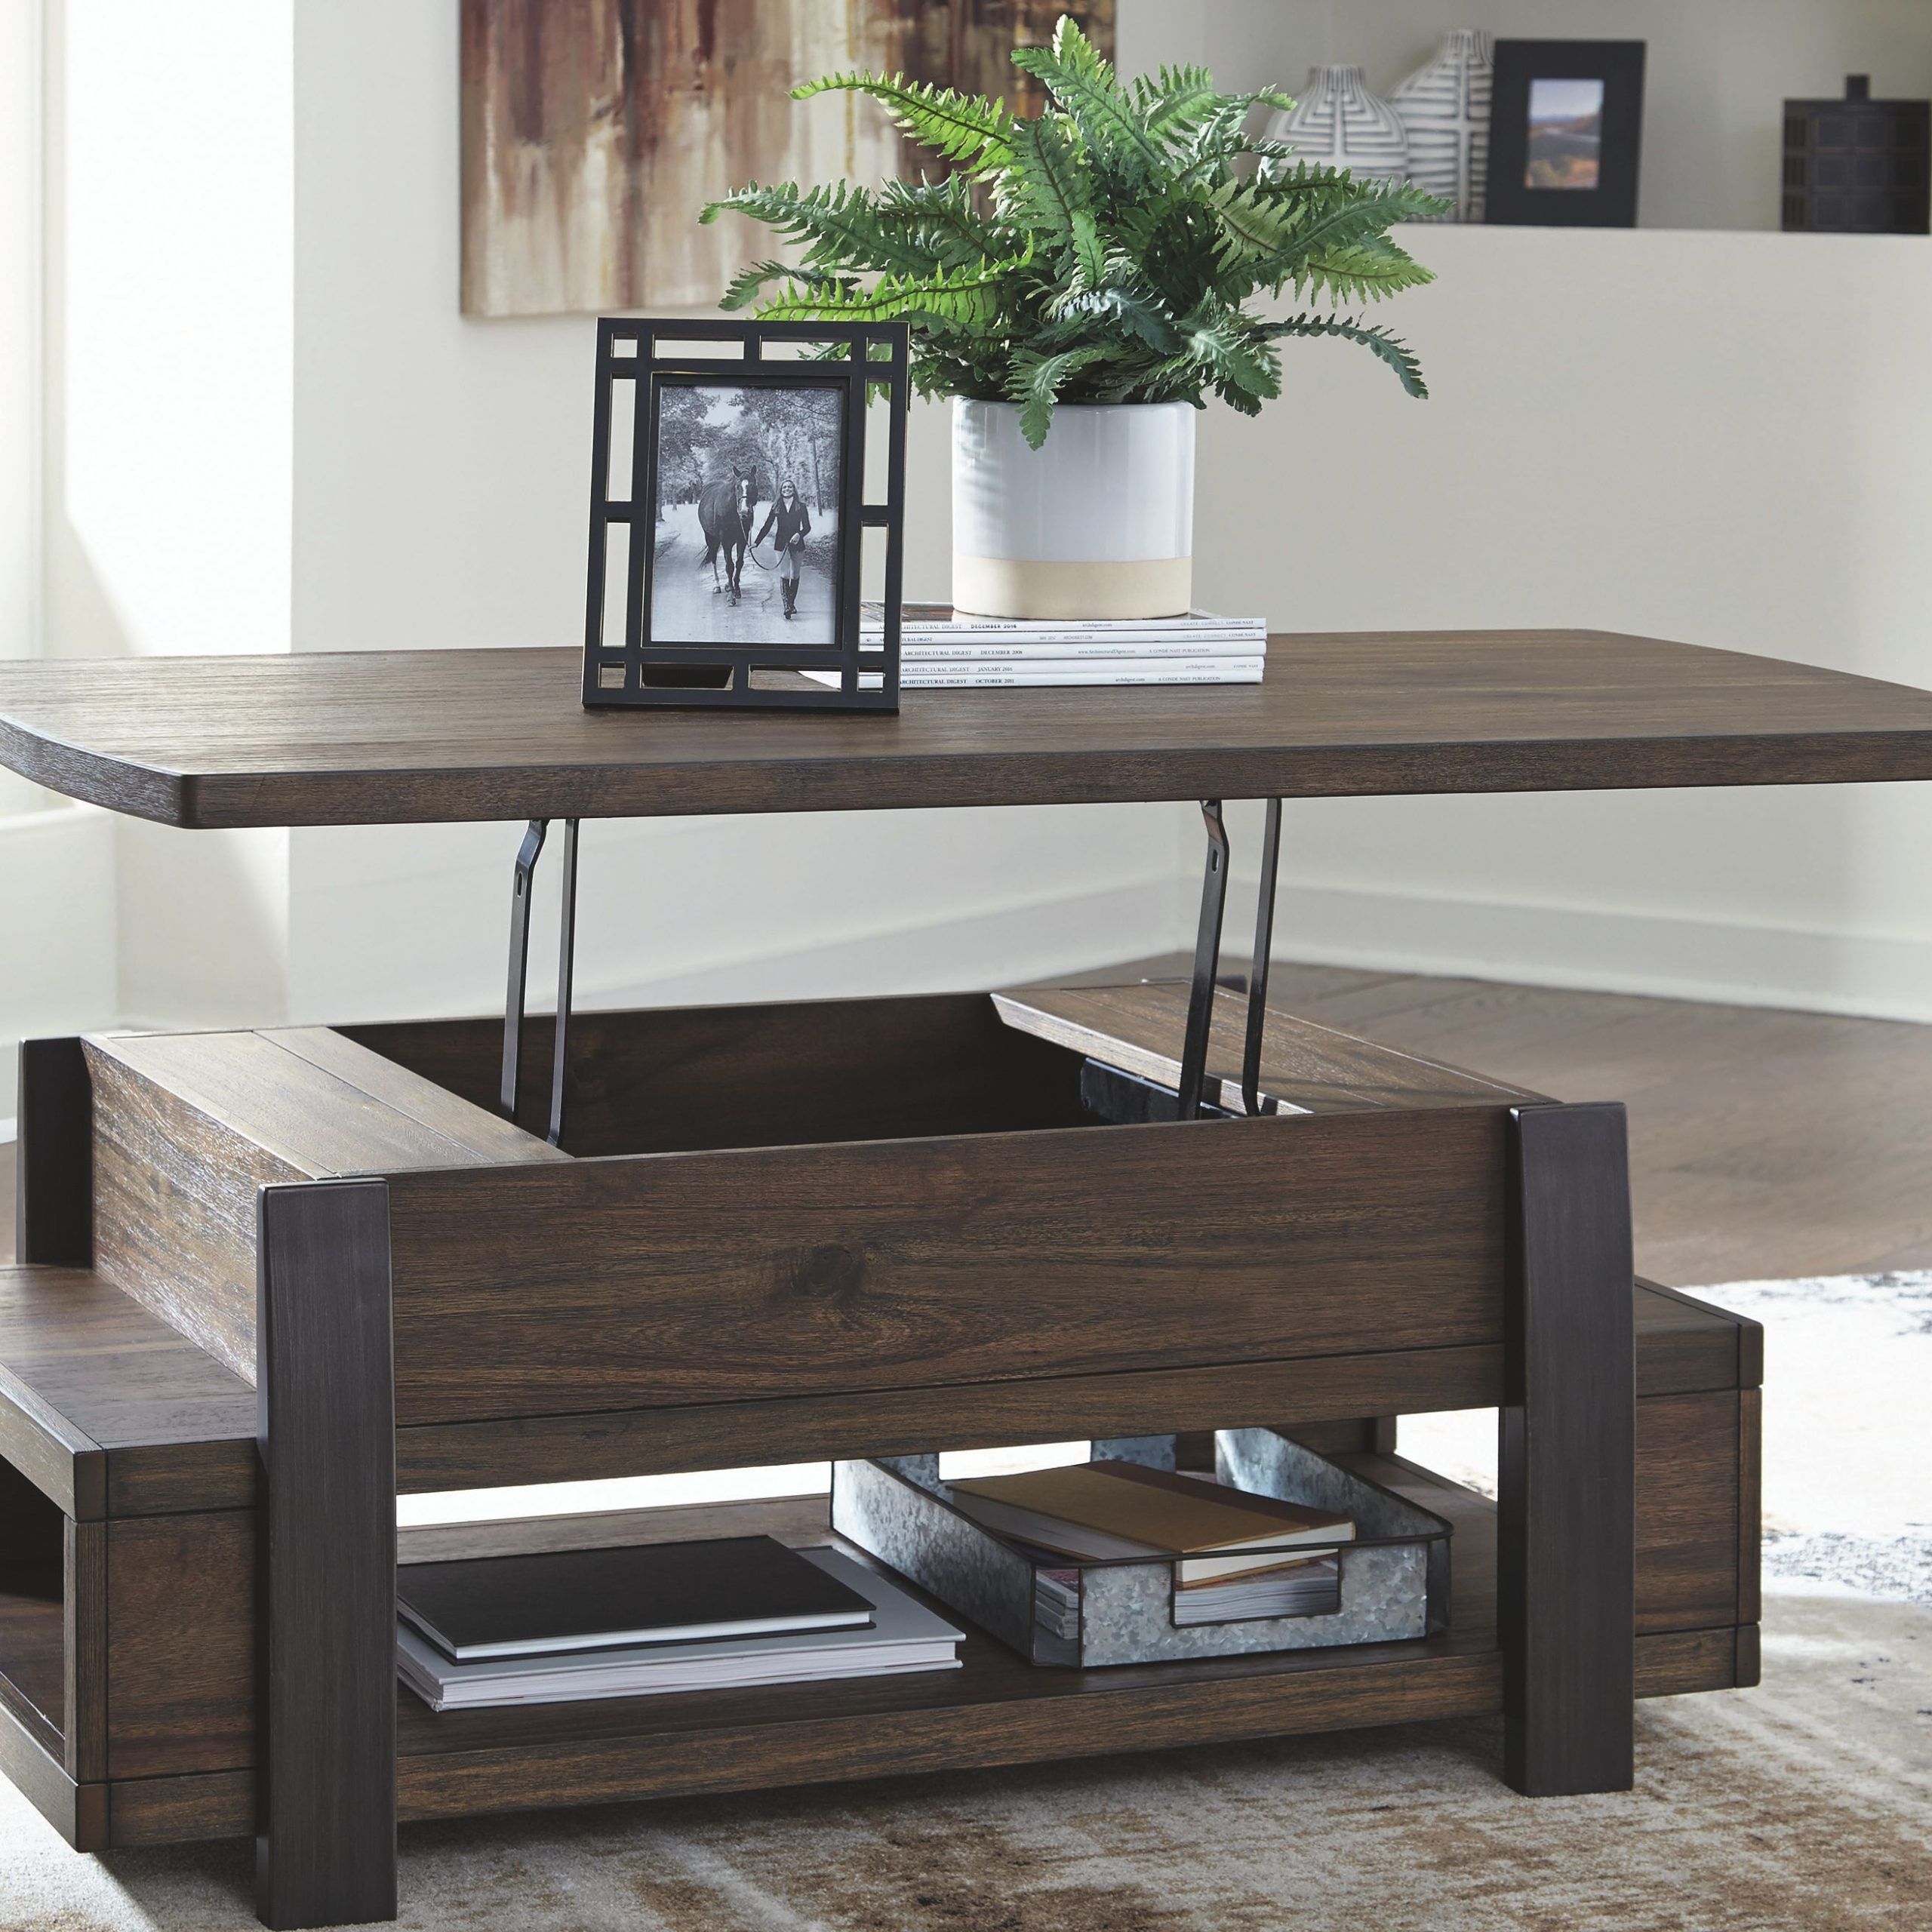 Vailbry Coffee Table With Lift Top, Brown | Lift Top Coffee Table Intended For High Gloss Lift Top Coffee Tables (Gallery 6 of 21)